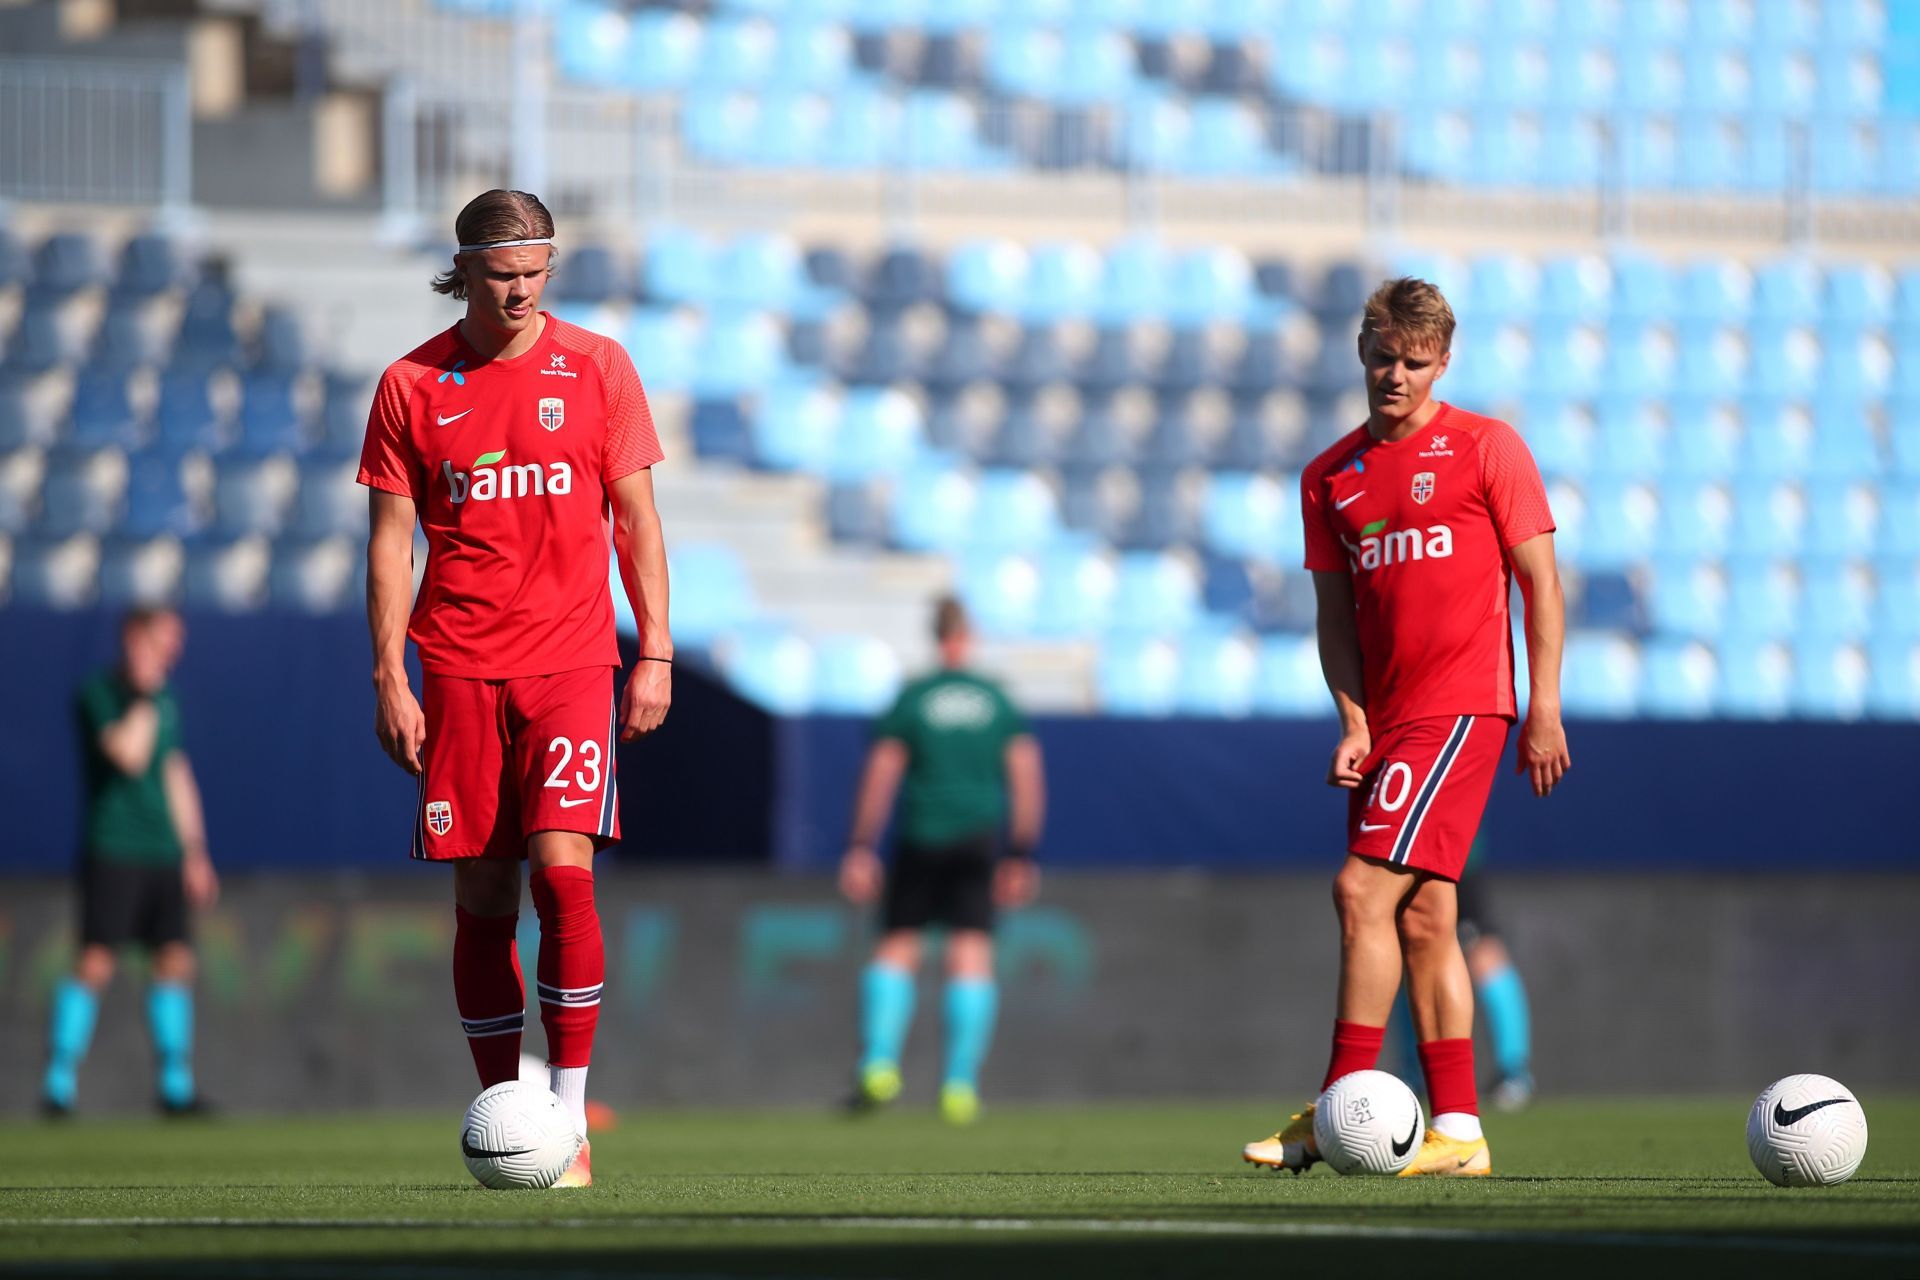 Odegaard (right) plays alongside Haaland (left) for Norway